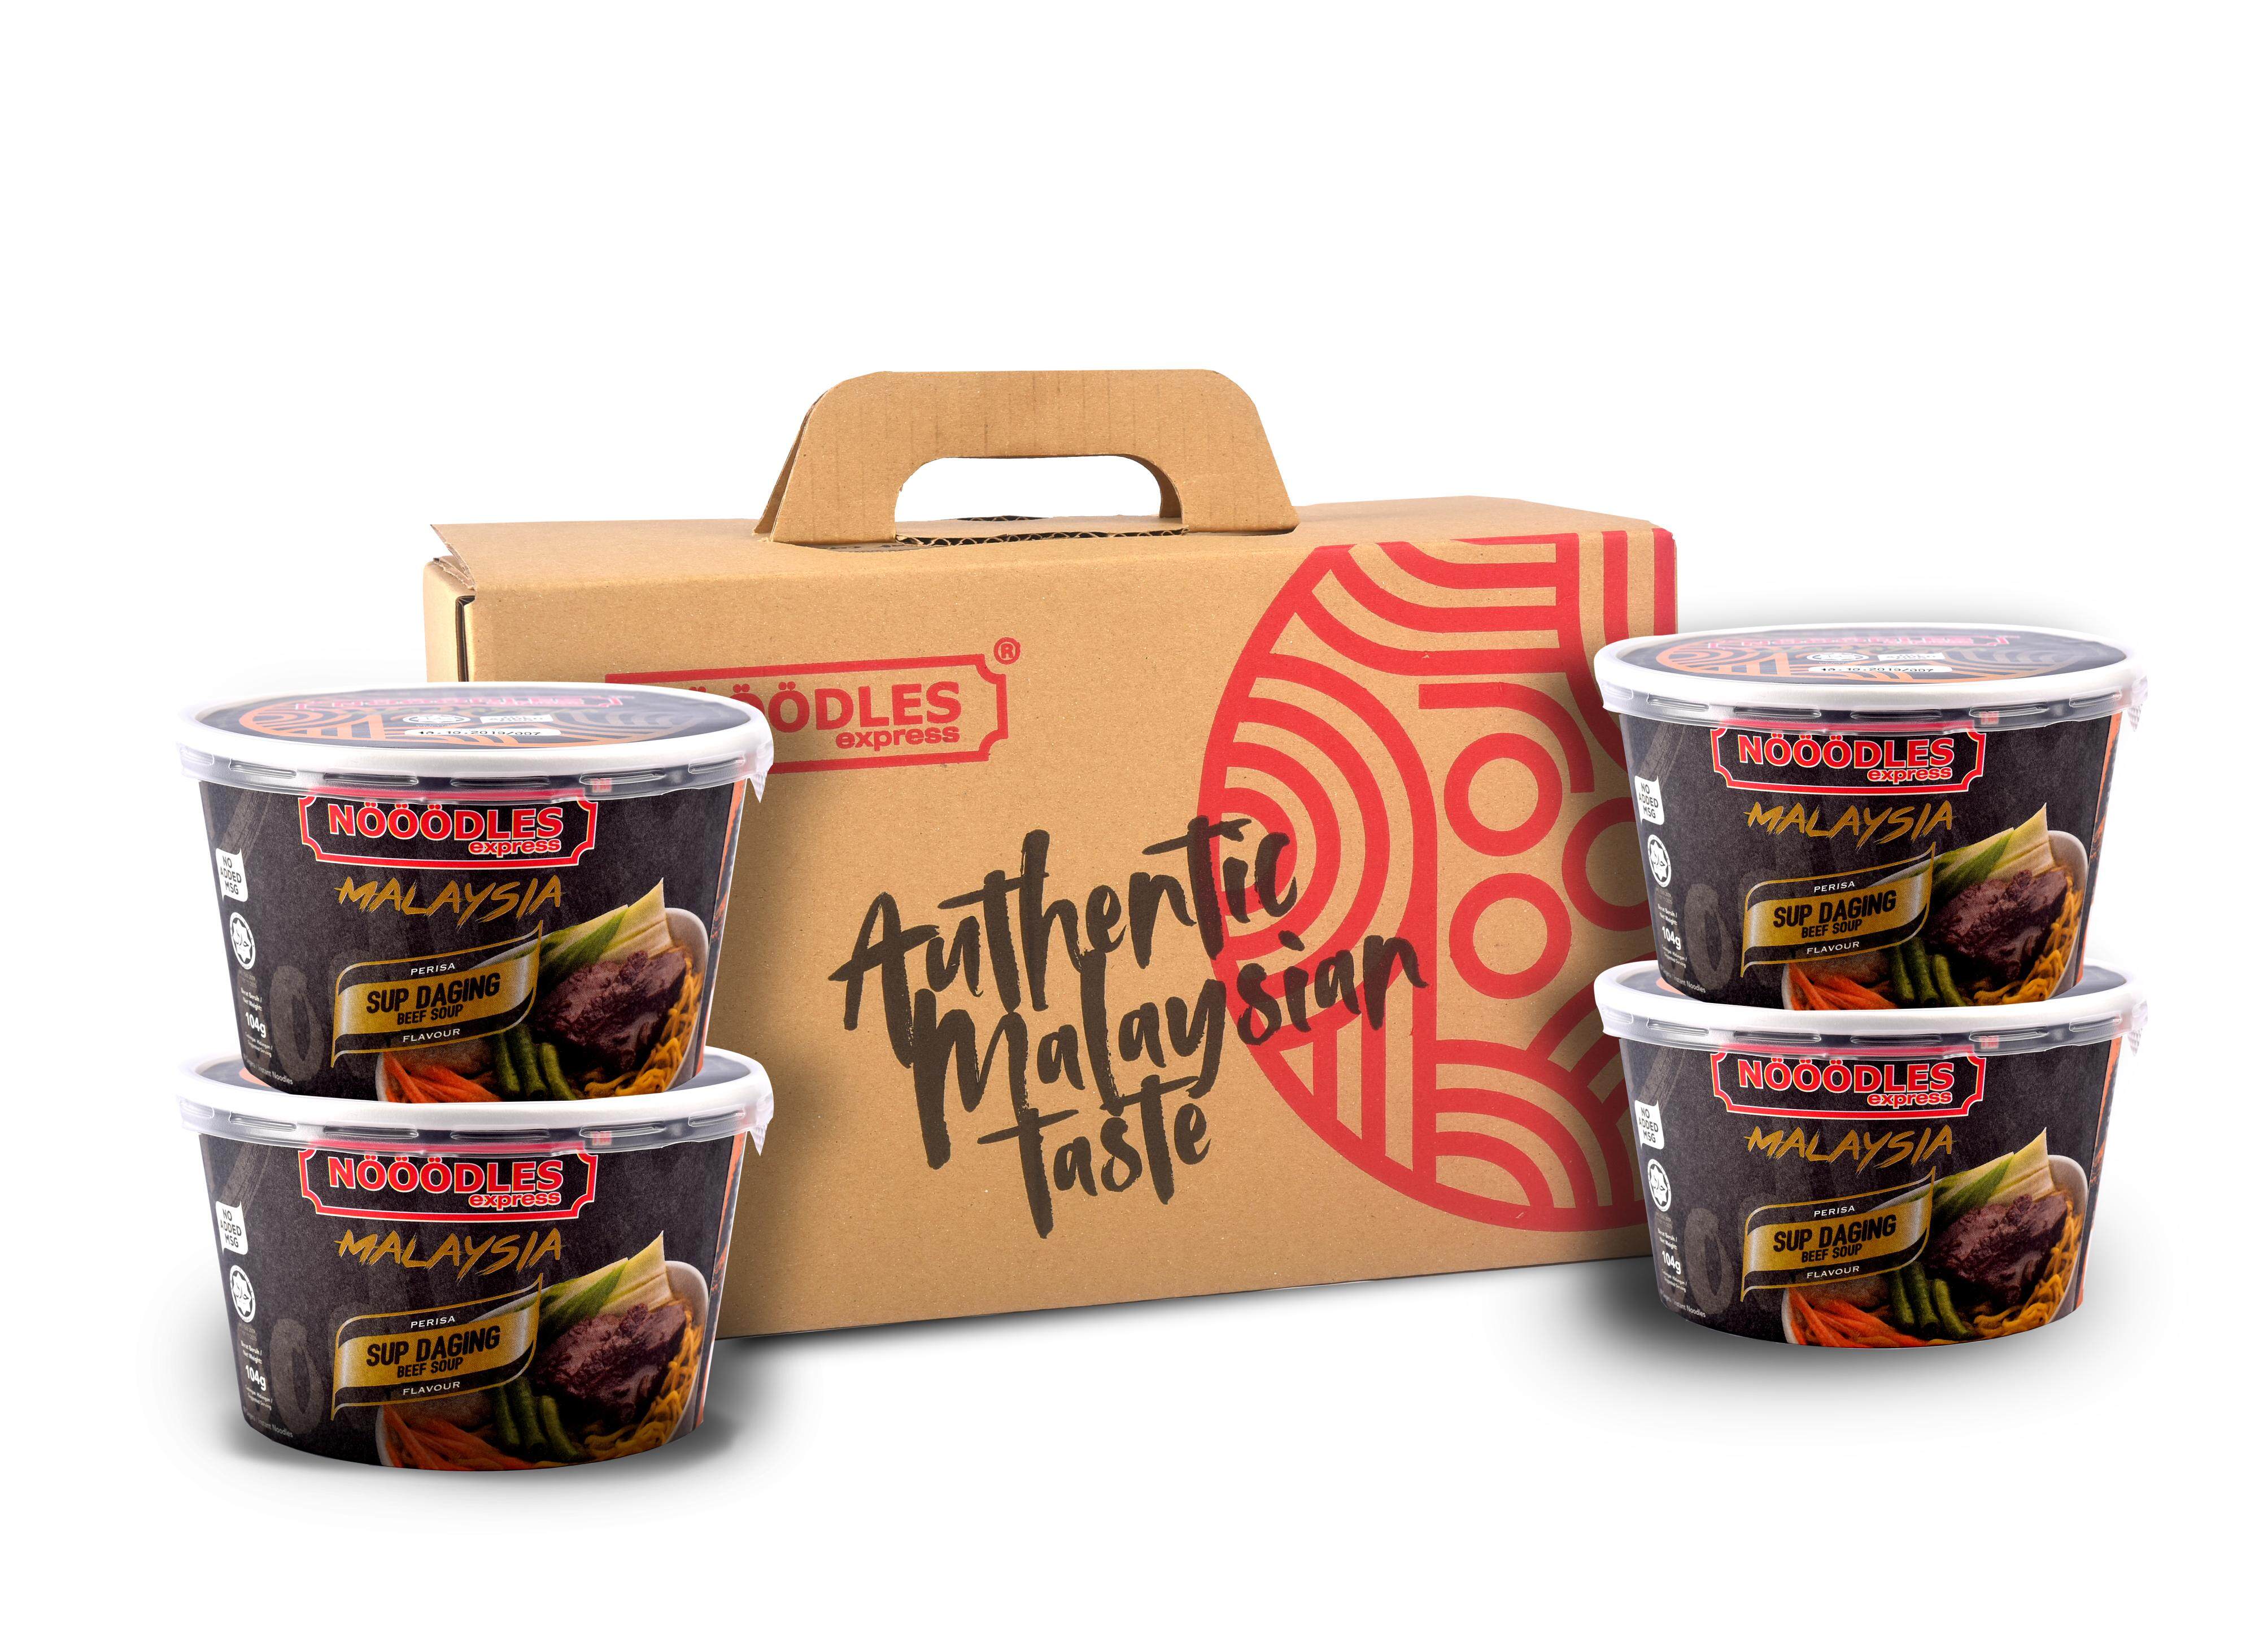 Box of 4 Instant Noodle Beef Soup Flavour (NDLES express) / 4 Mee Segera Perasa Sup Daging (NDLES express)